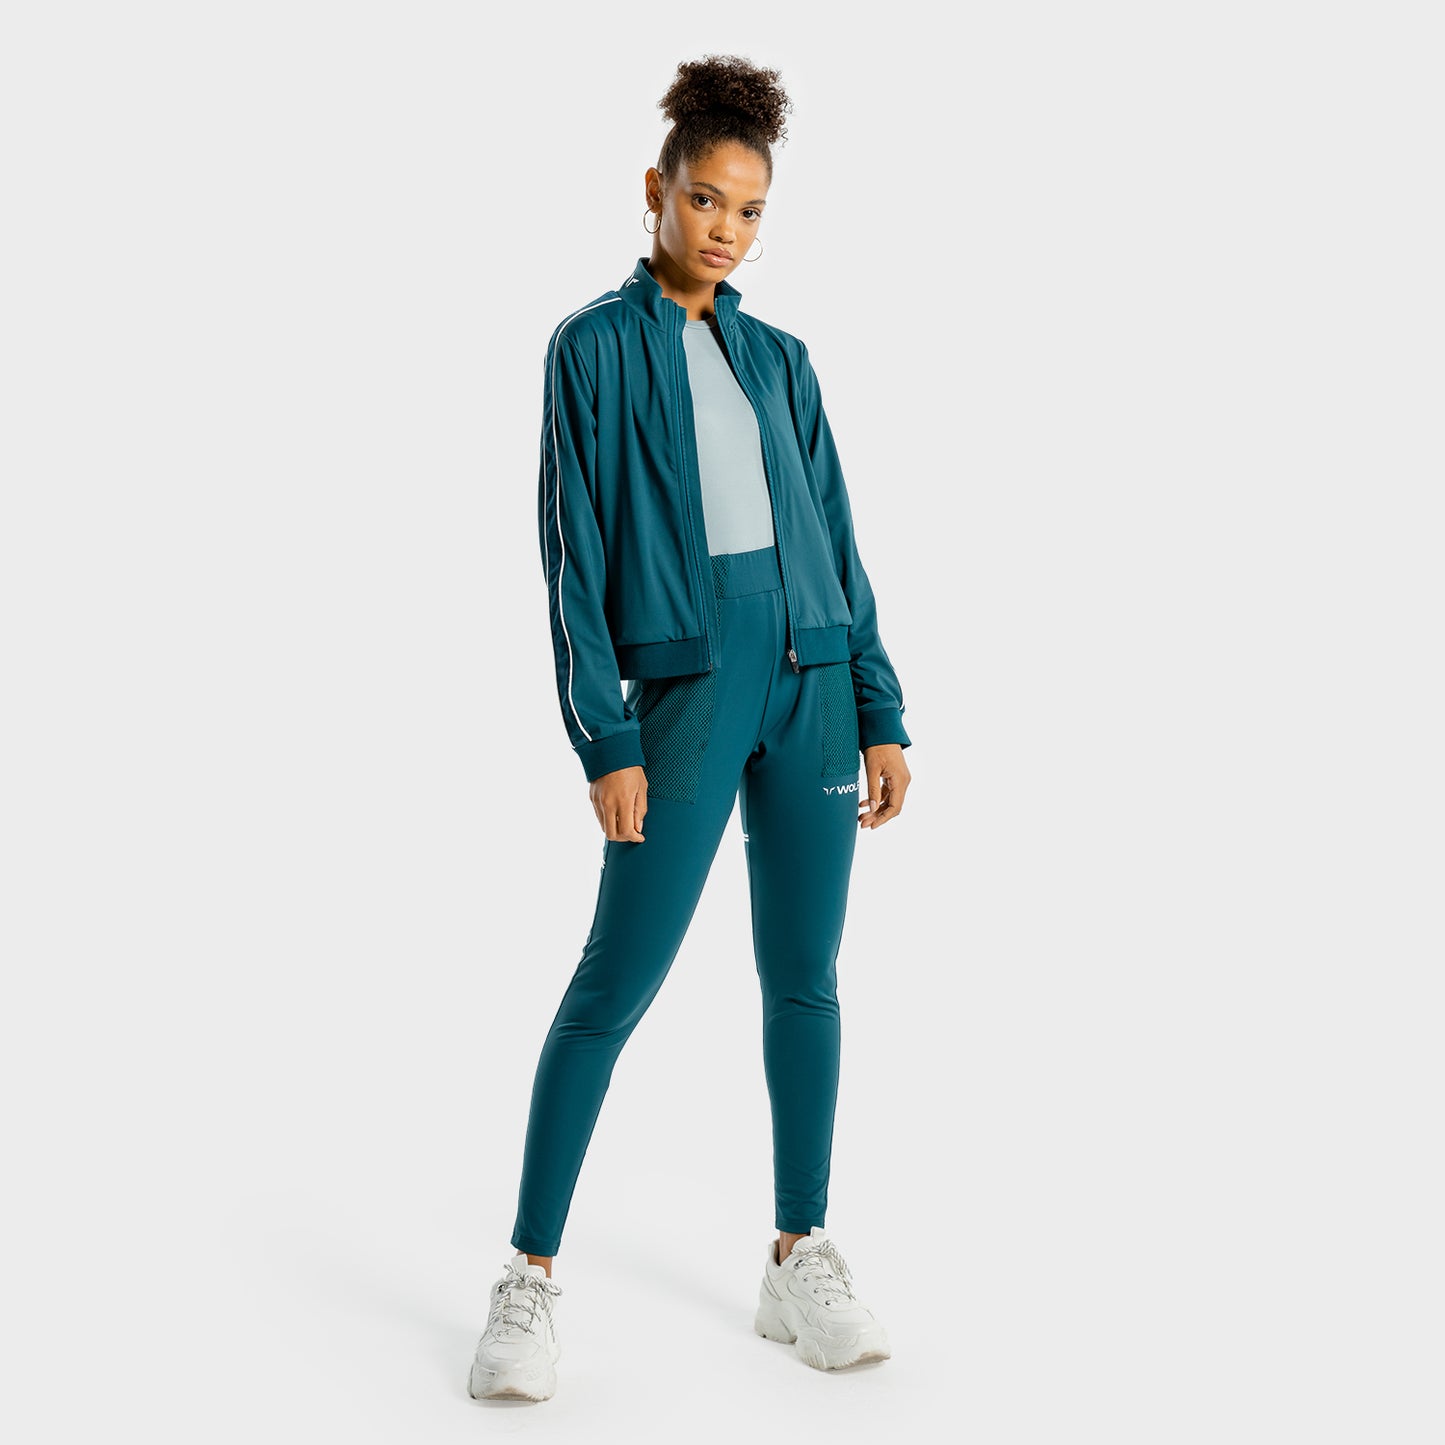 squatwolf-tops-for-women-track-top-teal-workout-noor